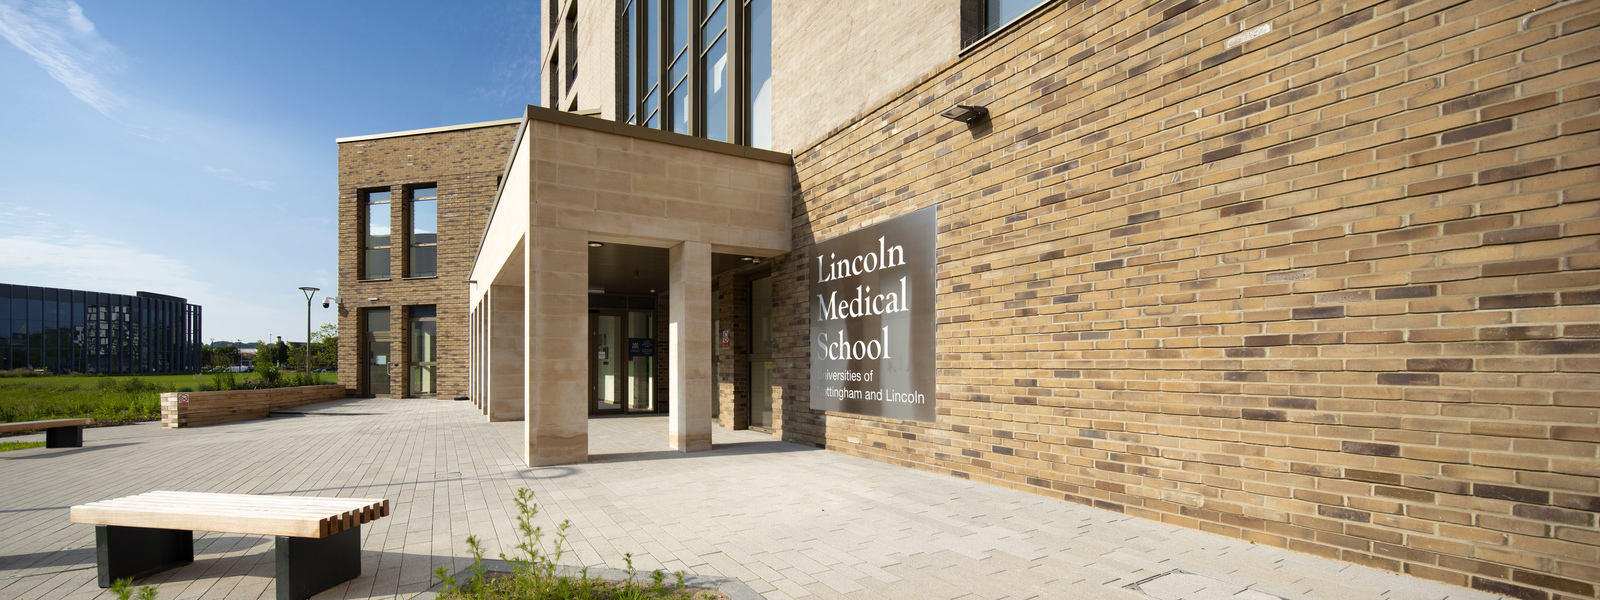 The entrance to Lincoln Medical School